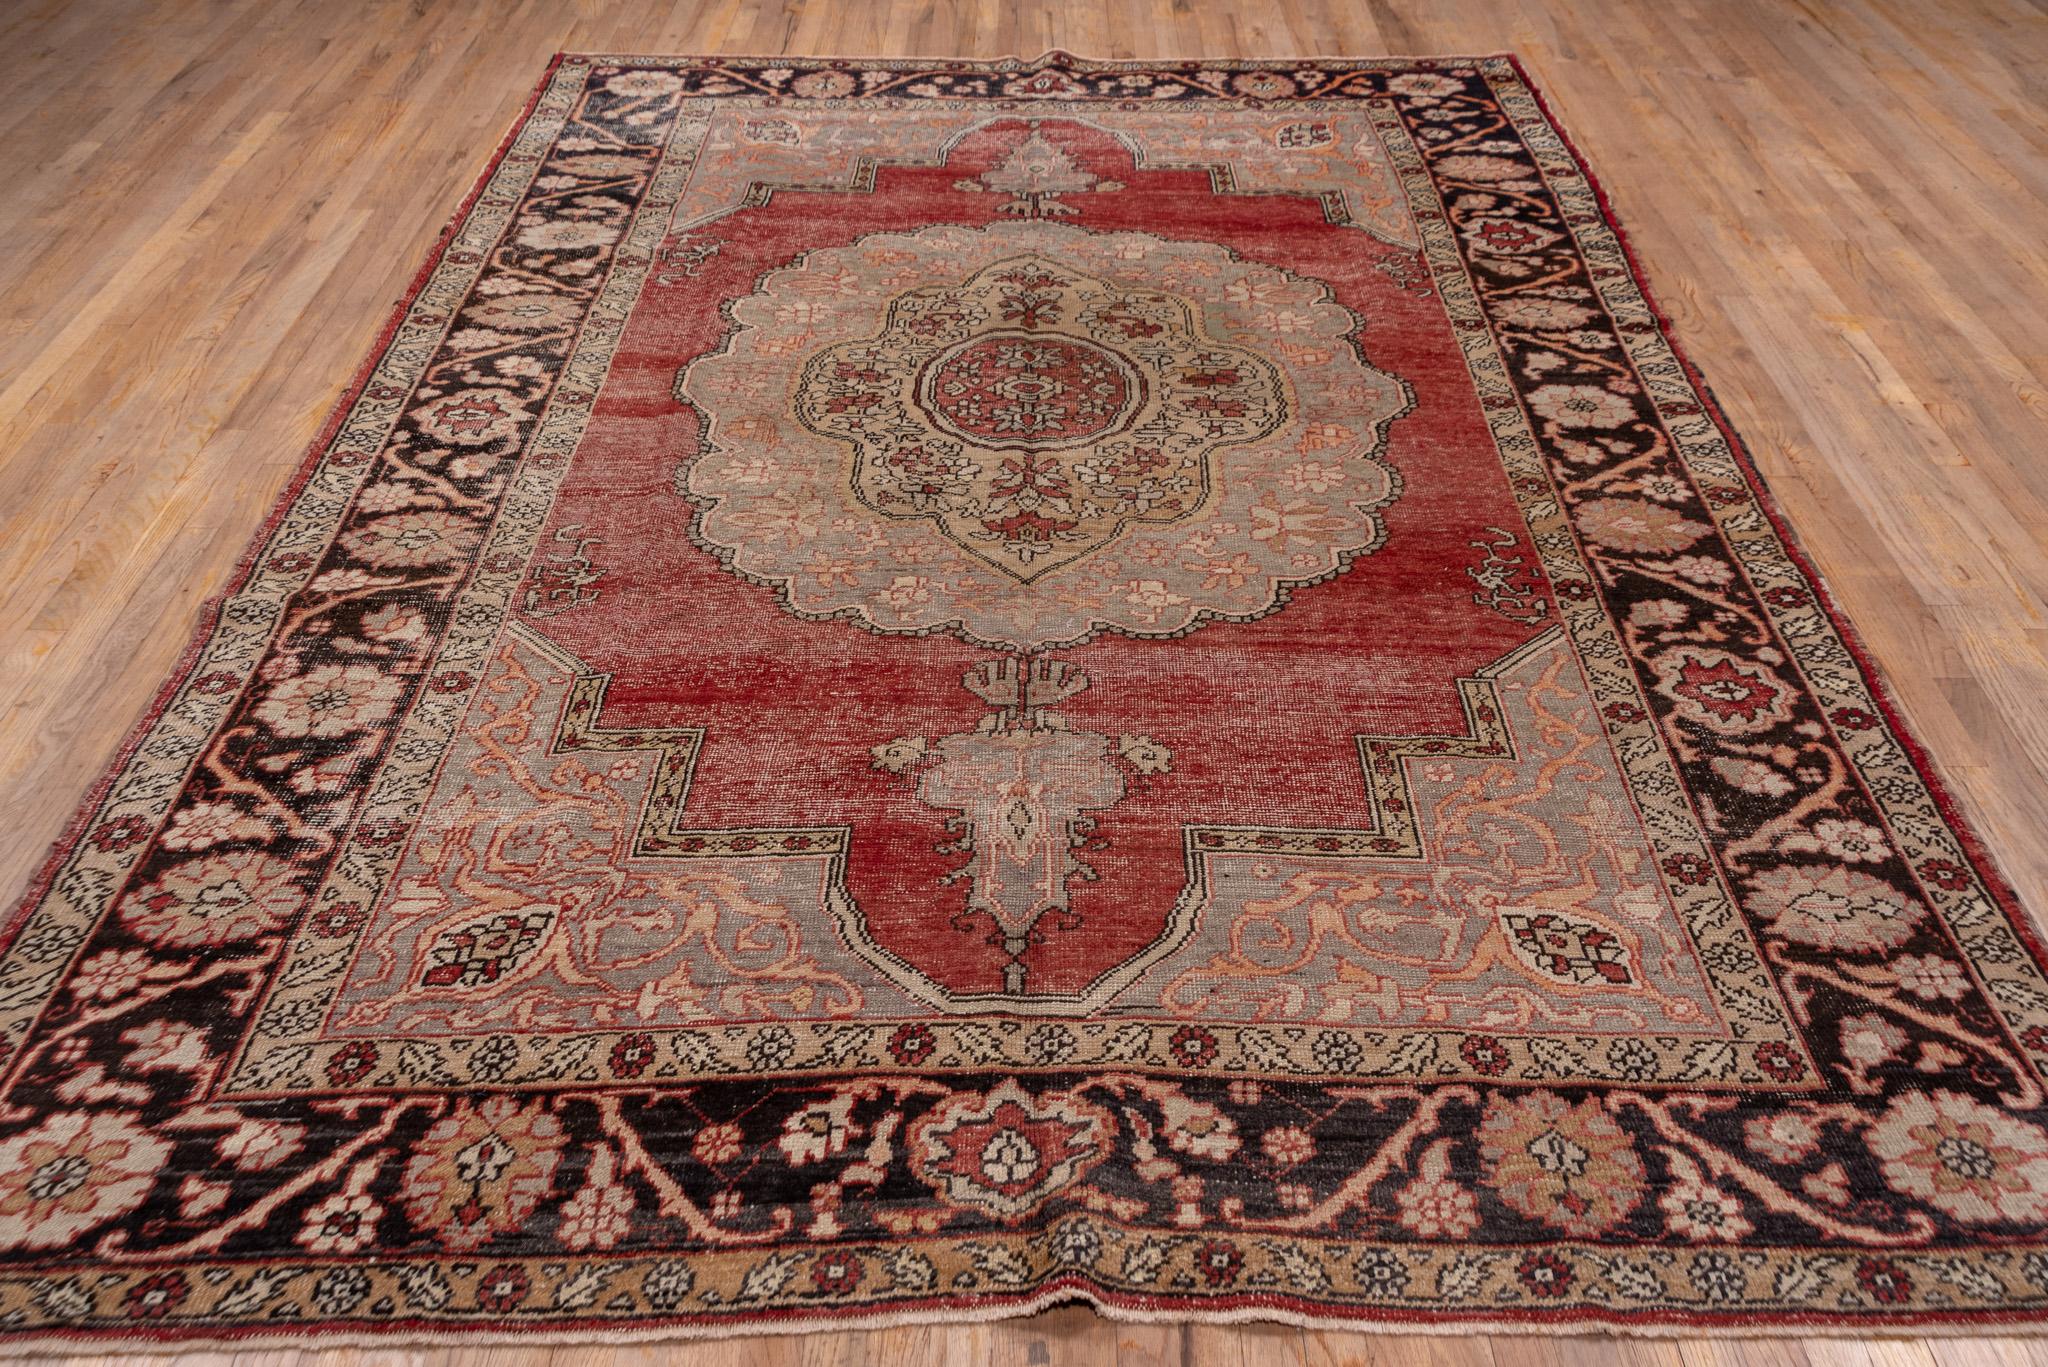 An Oushak Rug circa 1930. Hand knotted, made of 100% wool yarn.